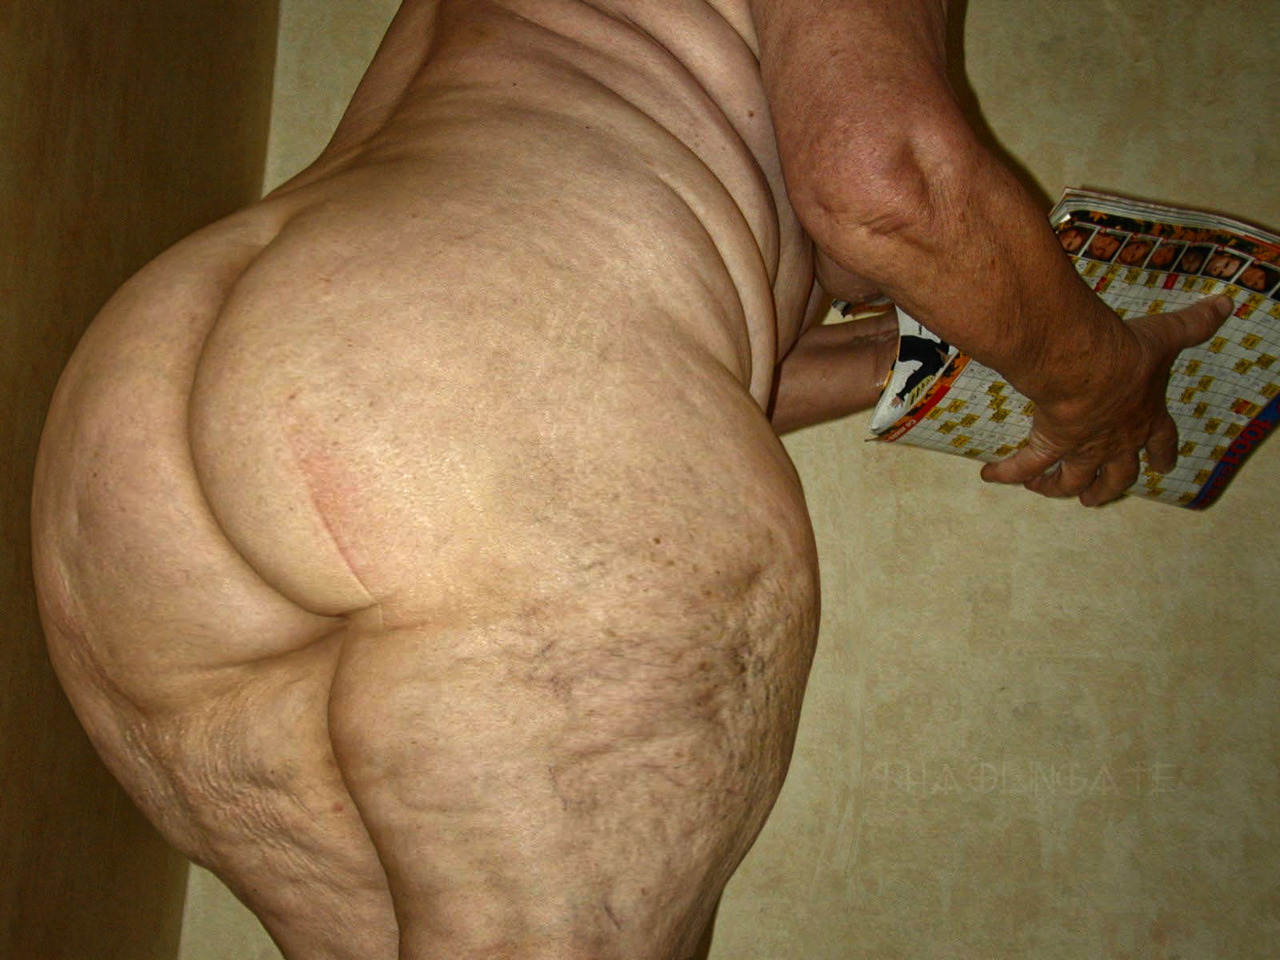 Old Big Ass Granny - Would asshole booty granny can find this